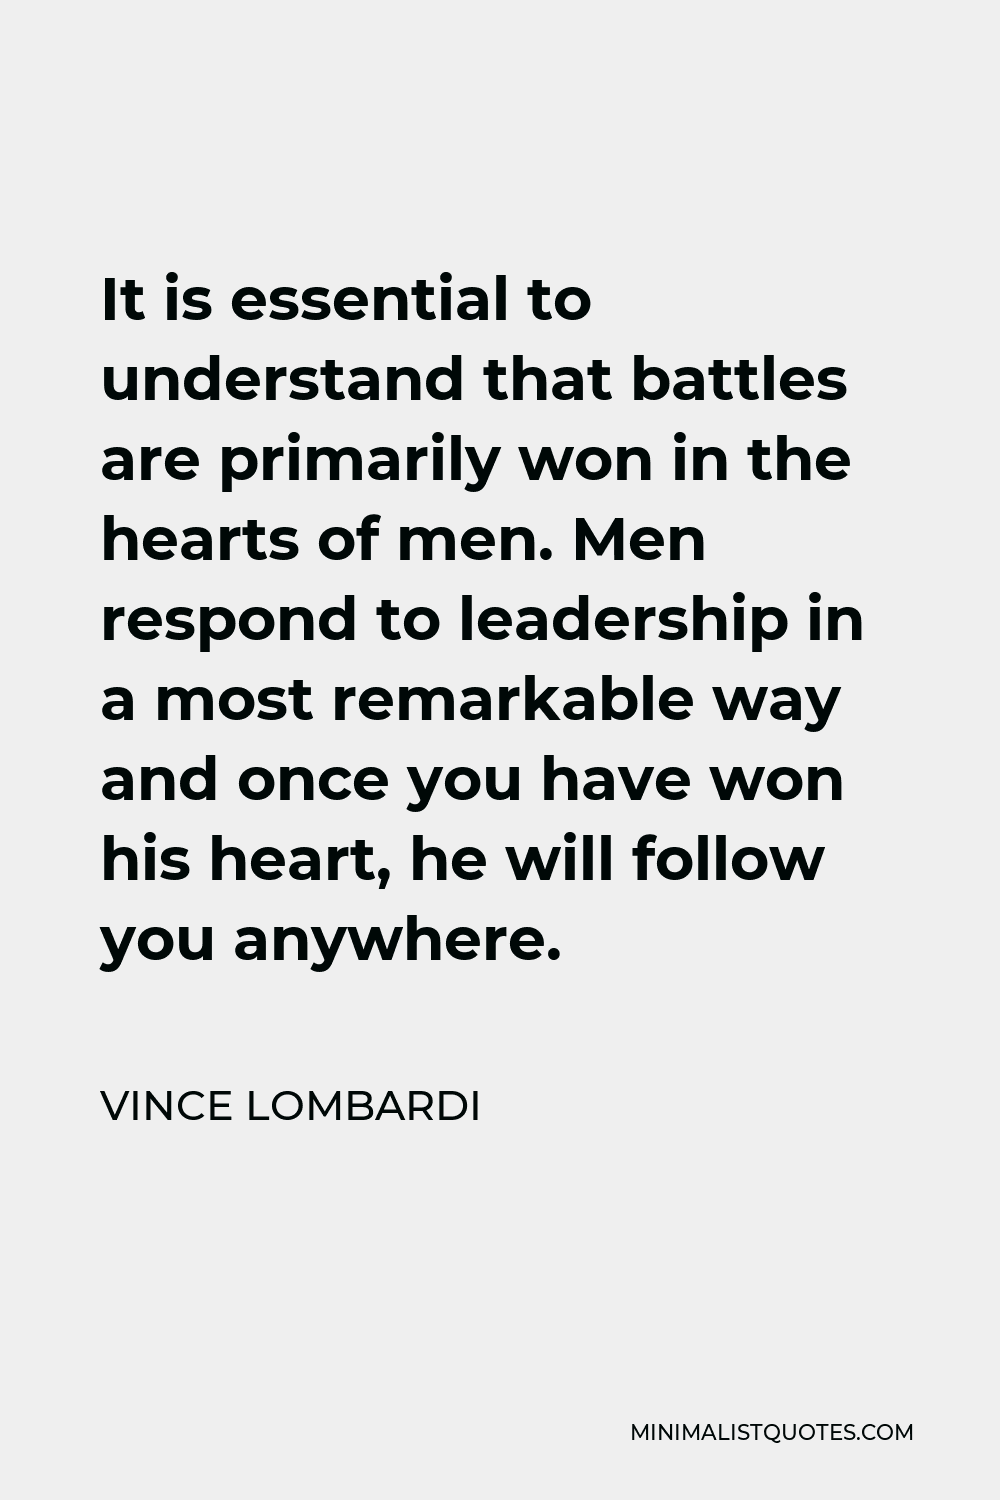 Vince Lombardi Quote - It is essential to understand that battles are primarily won in the hearts of men. Men respond to leadership in a most remarkable way and once you have won his heart, he will follow you anywhere.